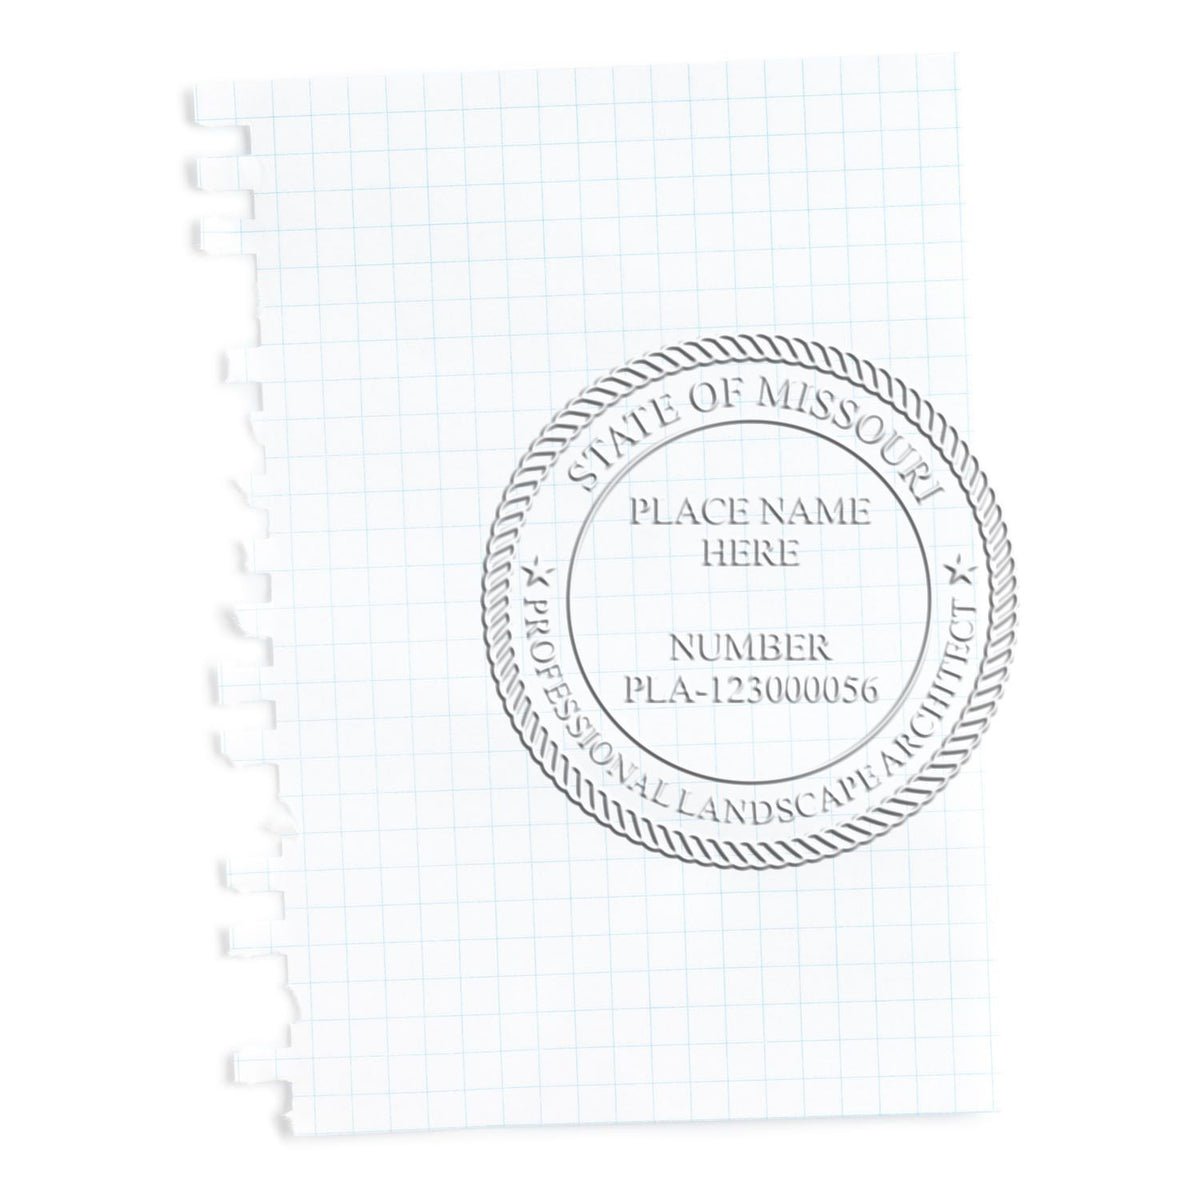 An alternative view of the Gift Missouri Landscape Architect Seal stamped on a sheet of paper showing the image in use